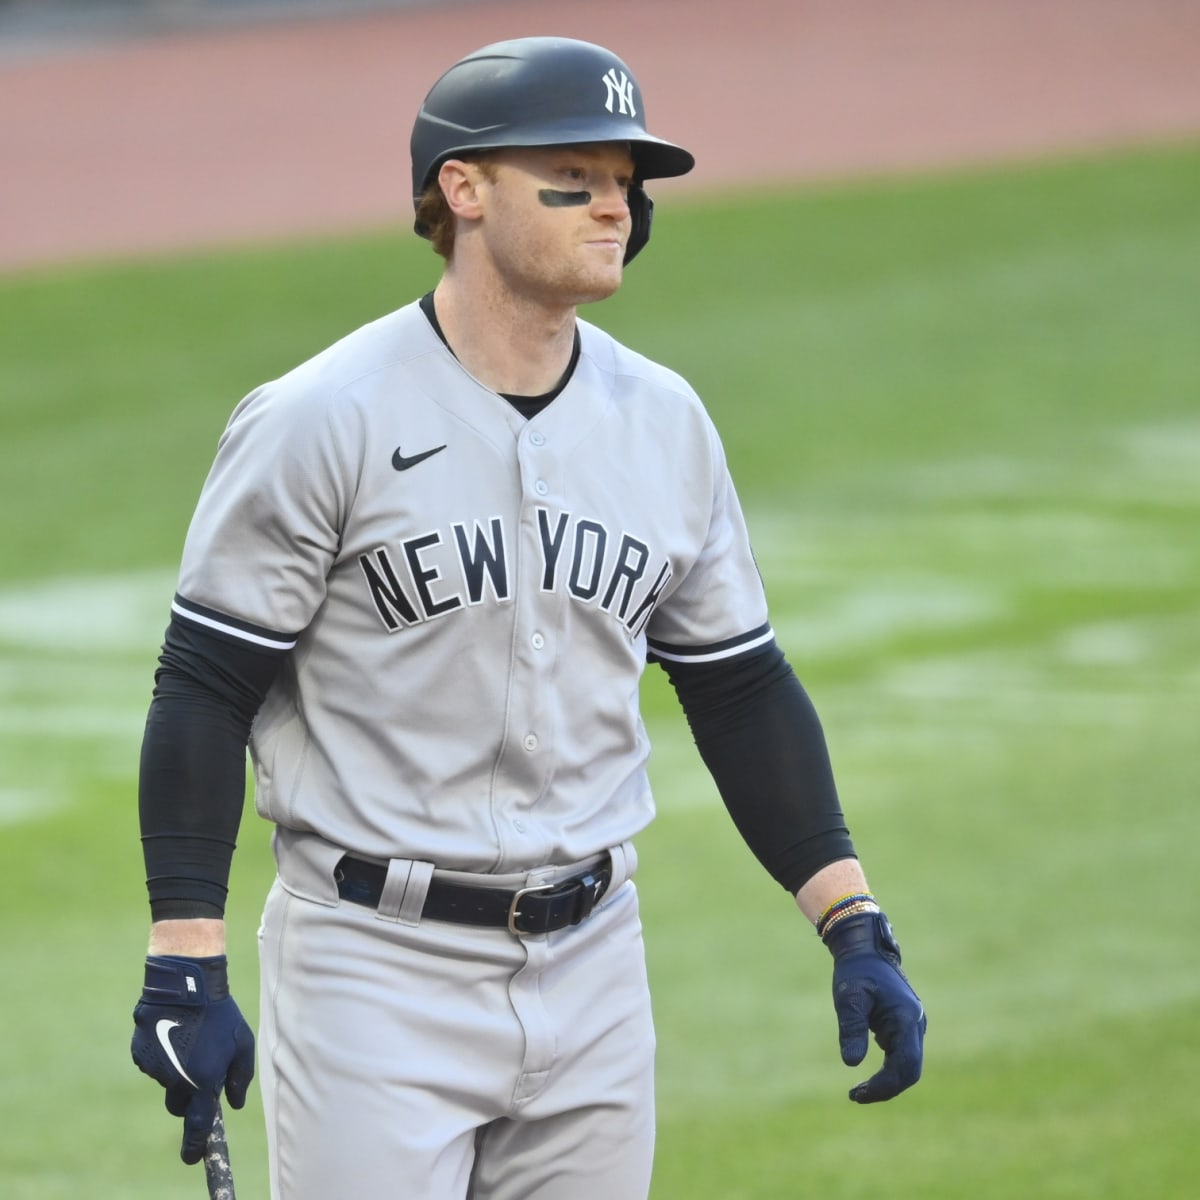 Ex-Yankees OF Clint Frazier makes humble White Sox debut: 'Don't